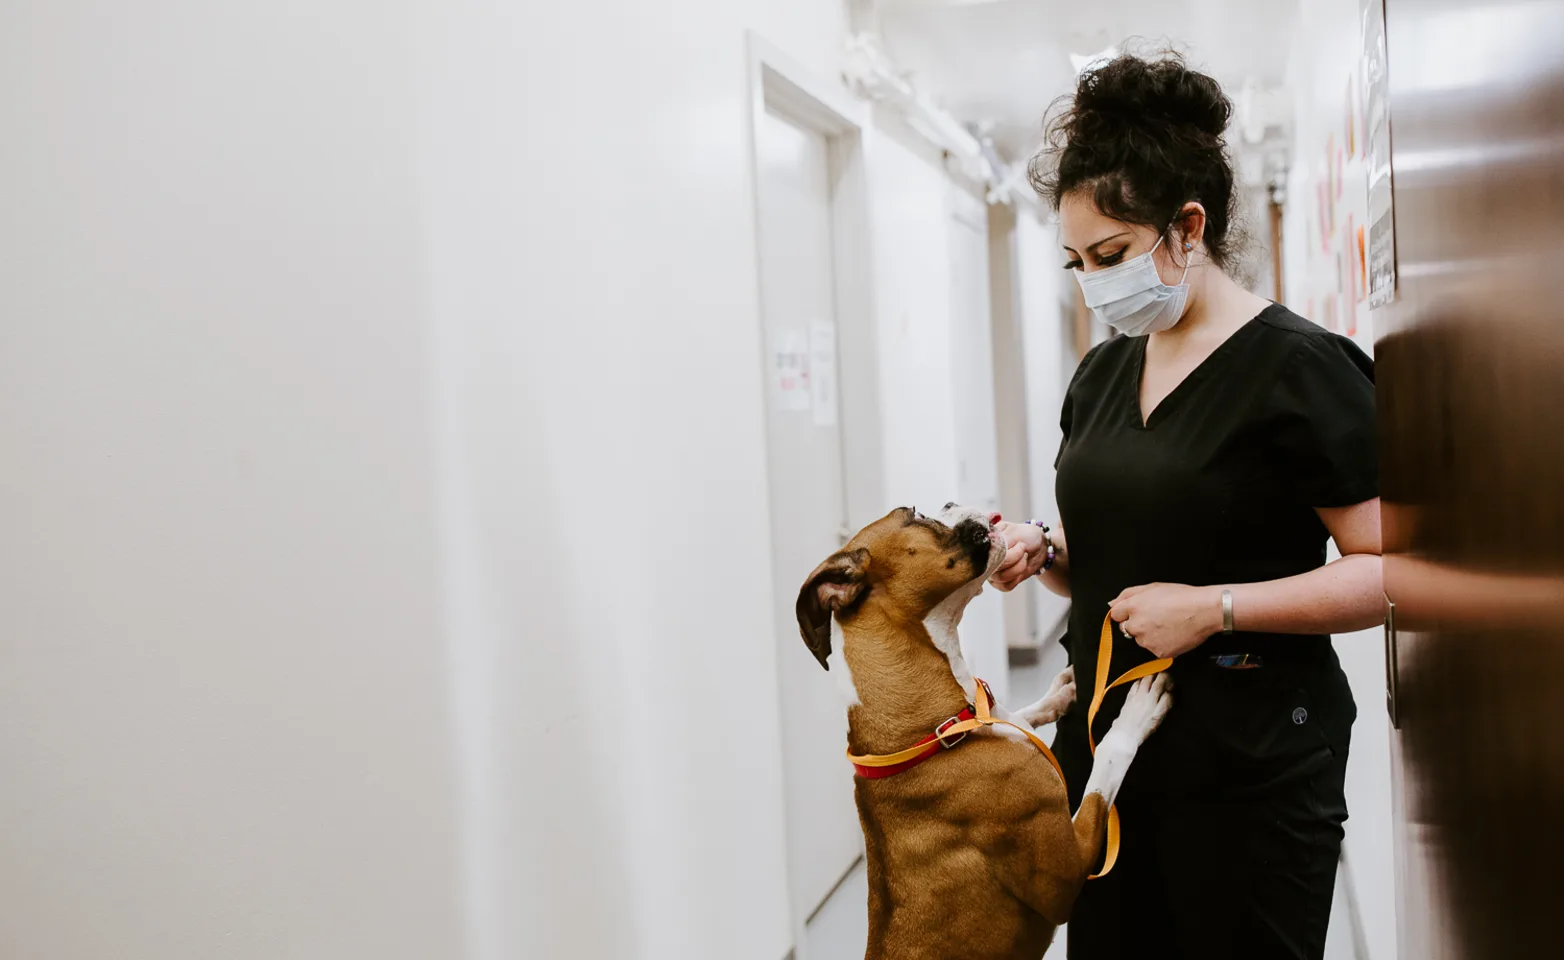 Vet giving a dog treats in a hallway